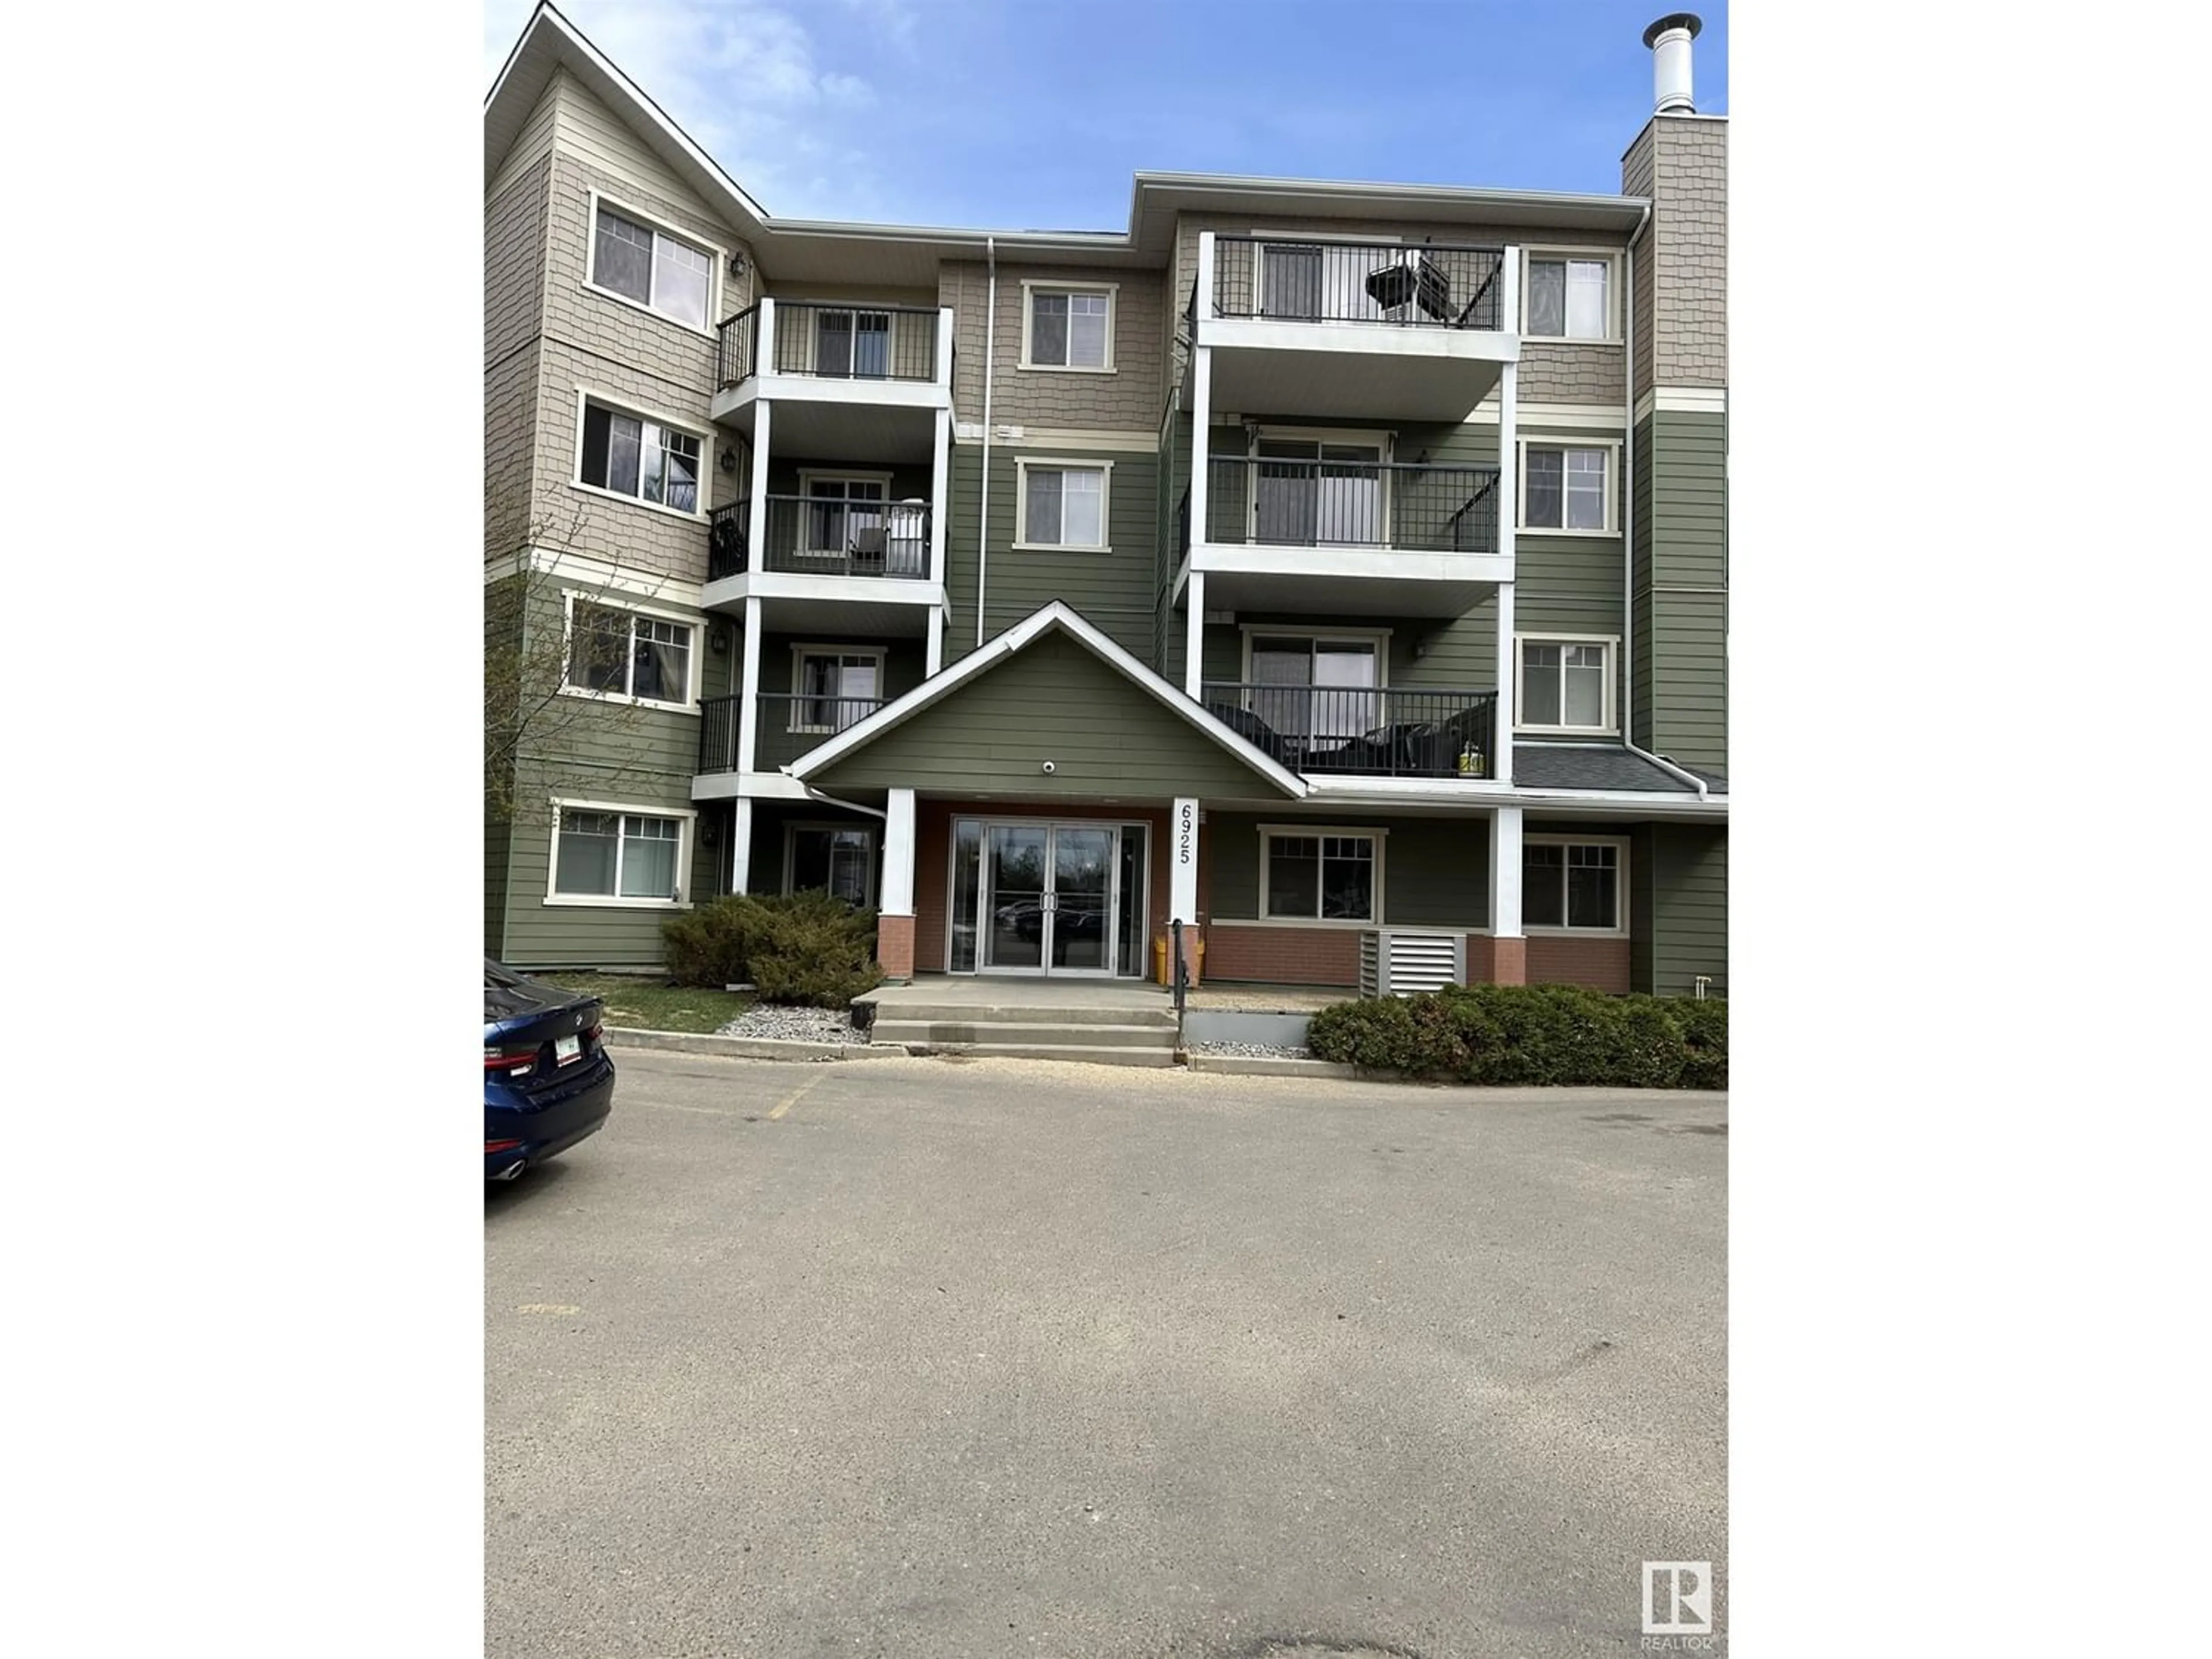 A pic from exterior of the house or condo for #210 6925 199 ST NW, Edmonton Alberta T5T3X8